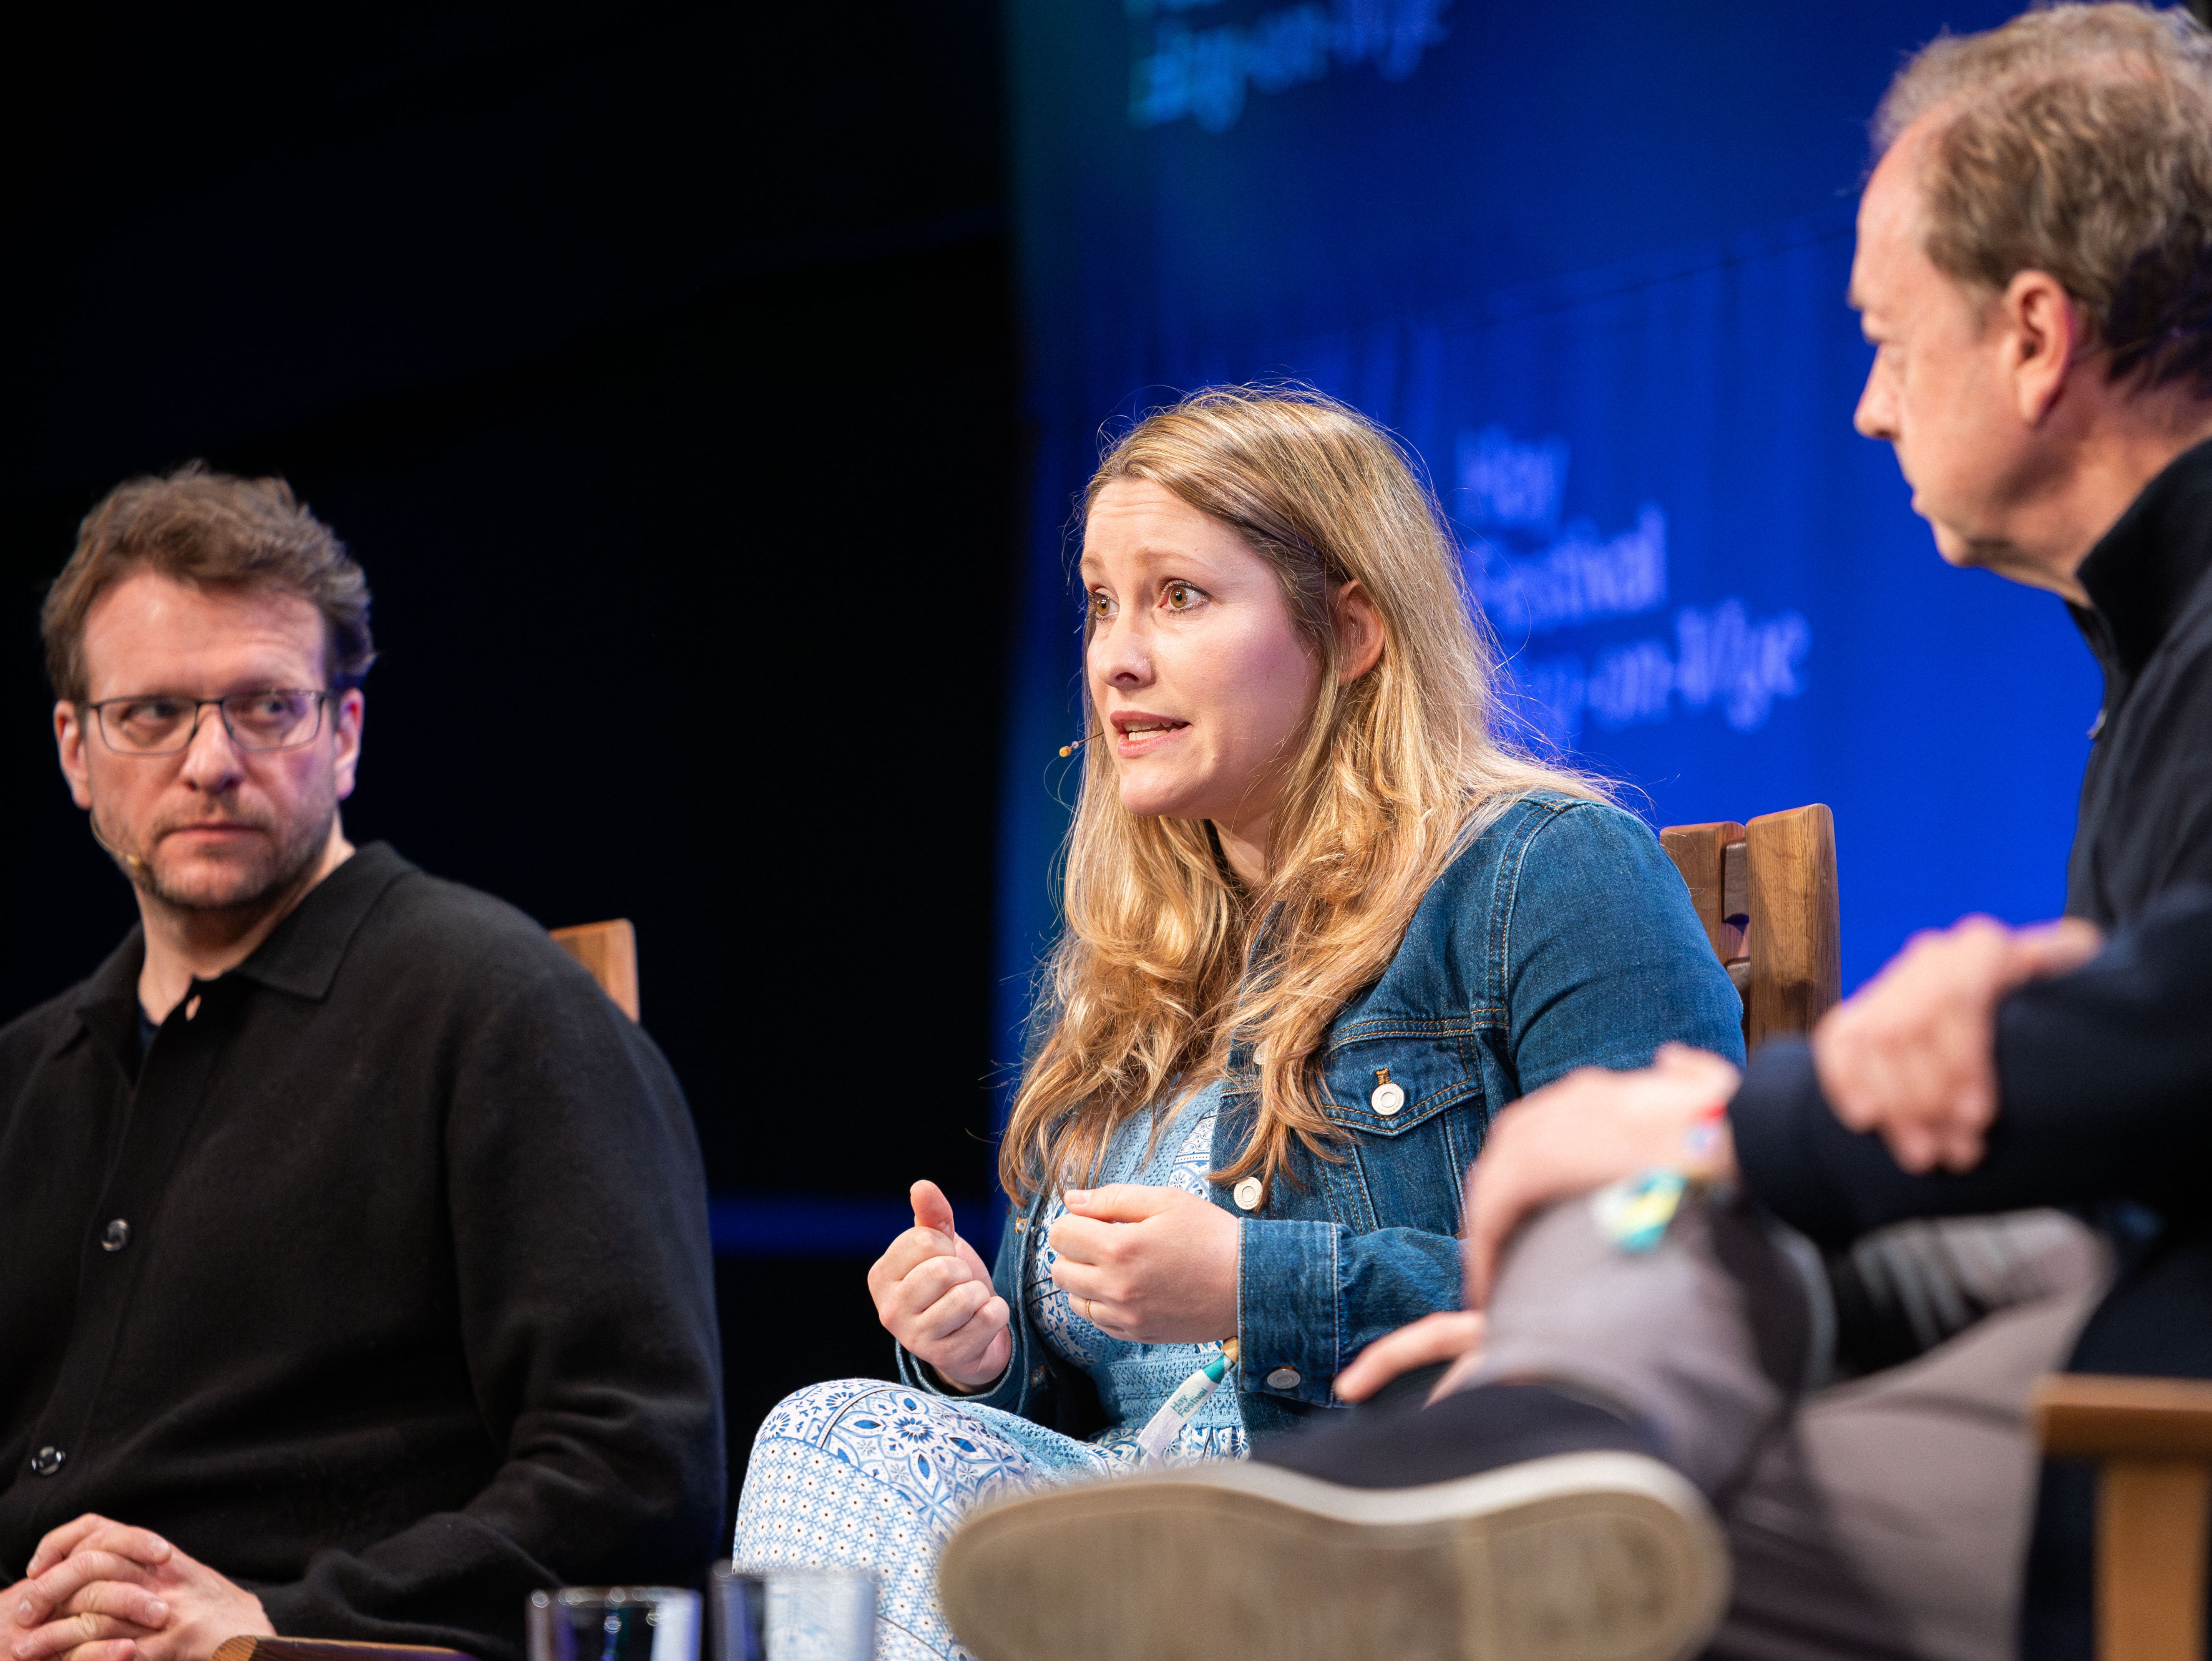 Peter Pomerantsev, Laura Bates and The Independent’s editor-in-chief Geordie Greig during a conversation at Hay Festival